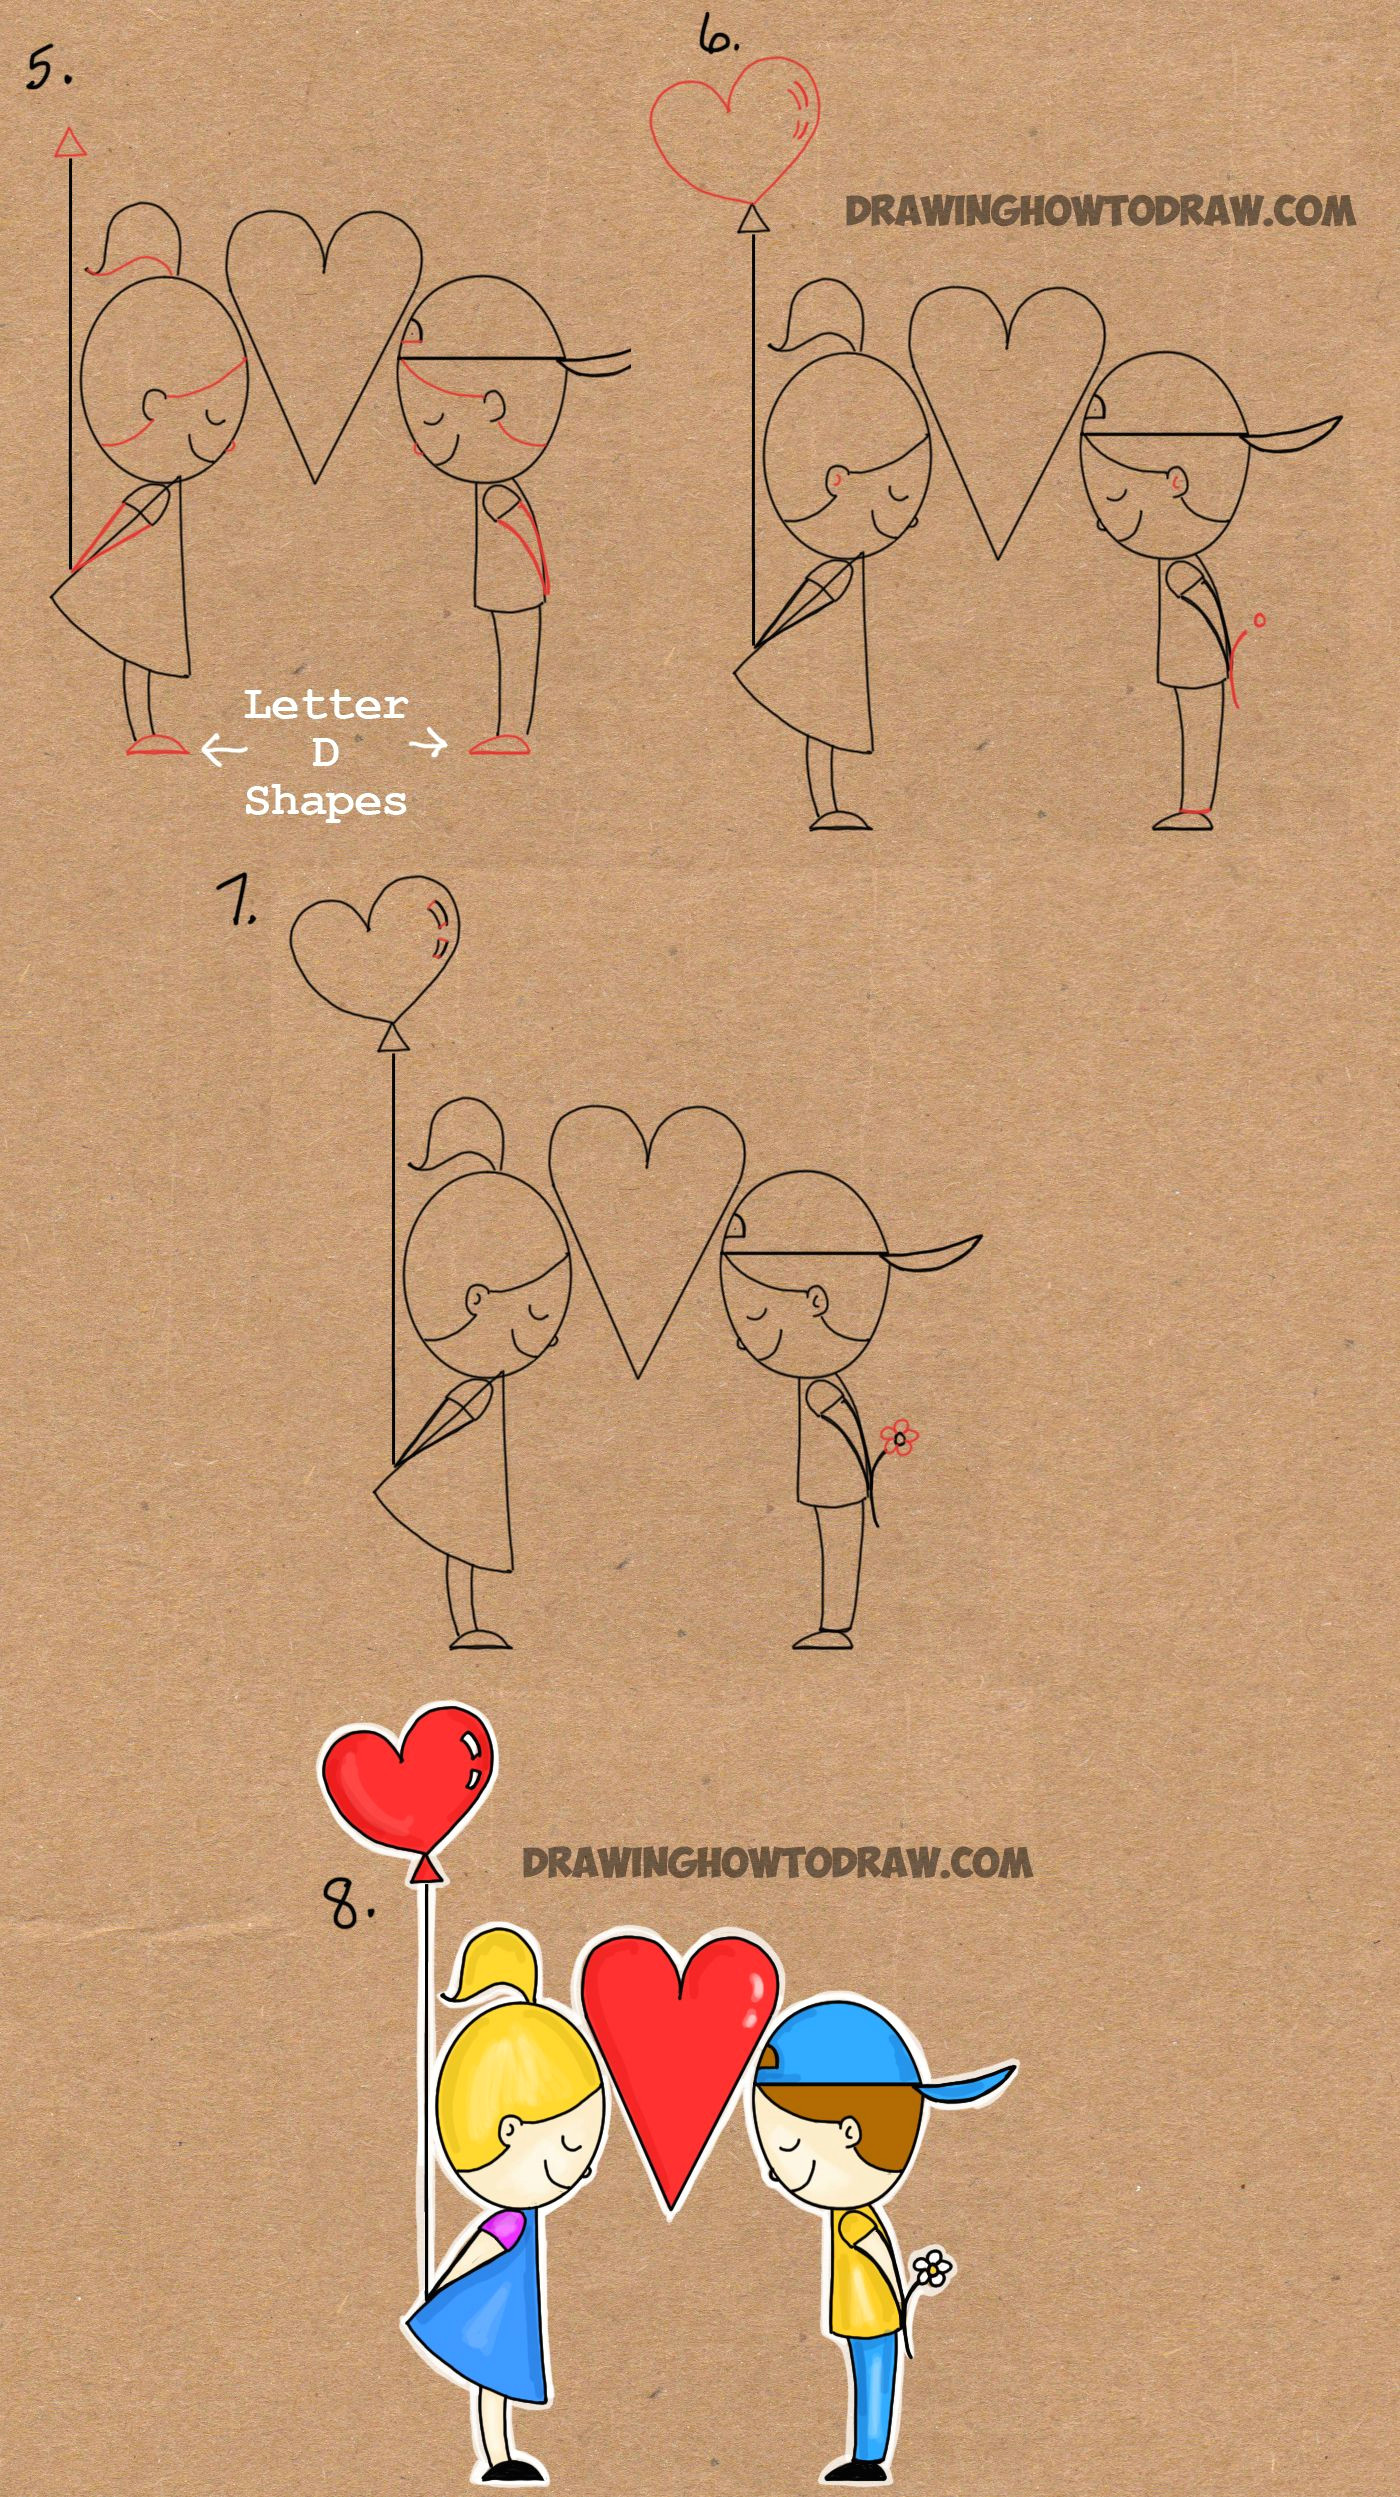 Easy Drawings Using Words How to Draw Cartoon Kids In Love From the Word Love In This Easy